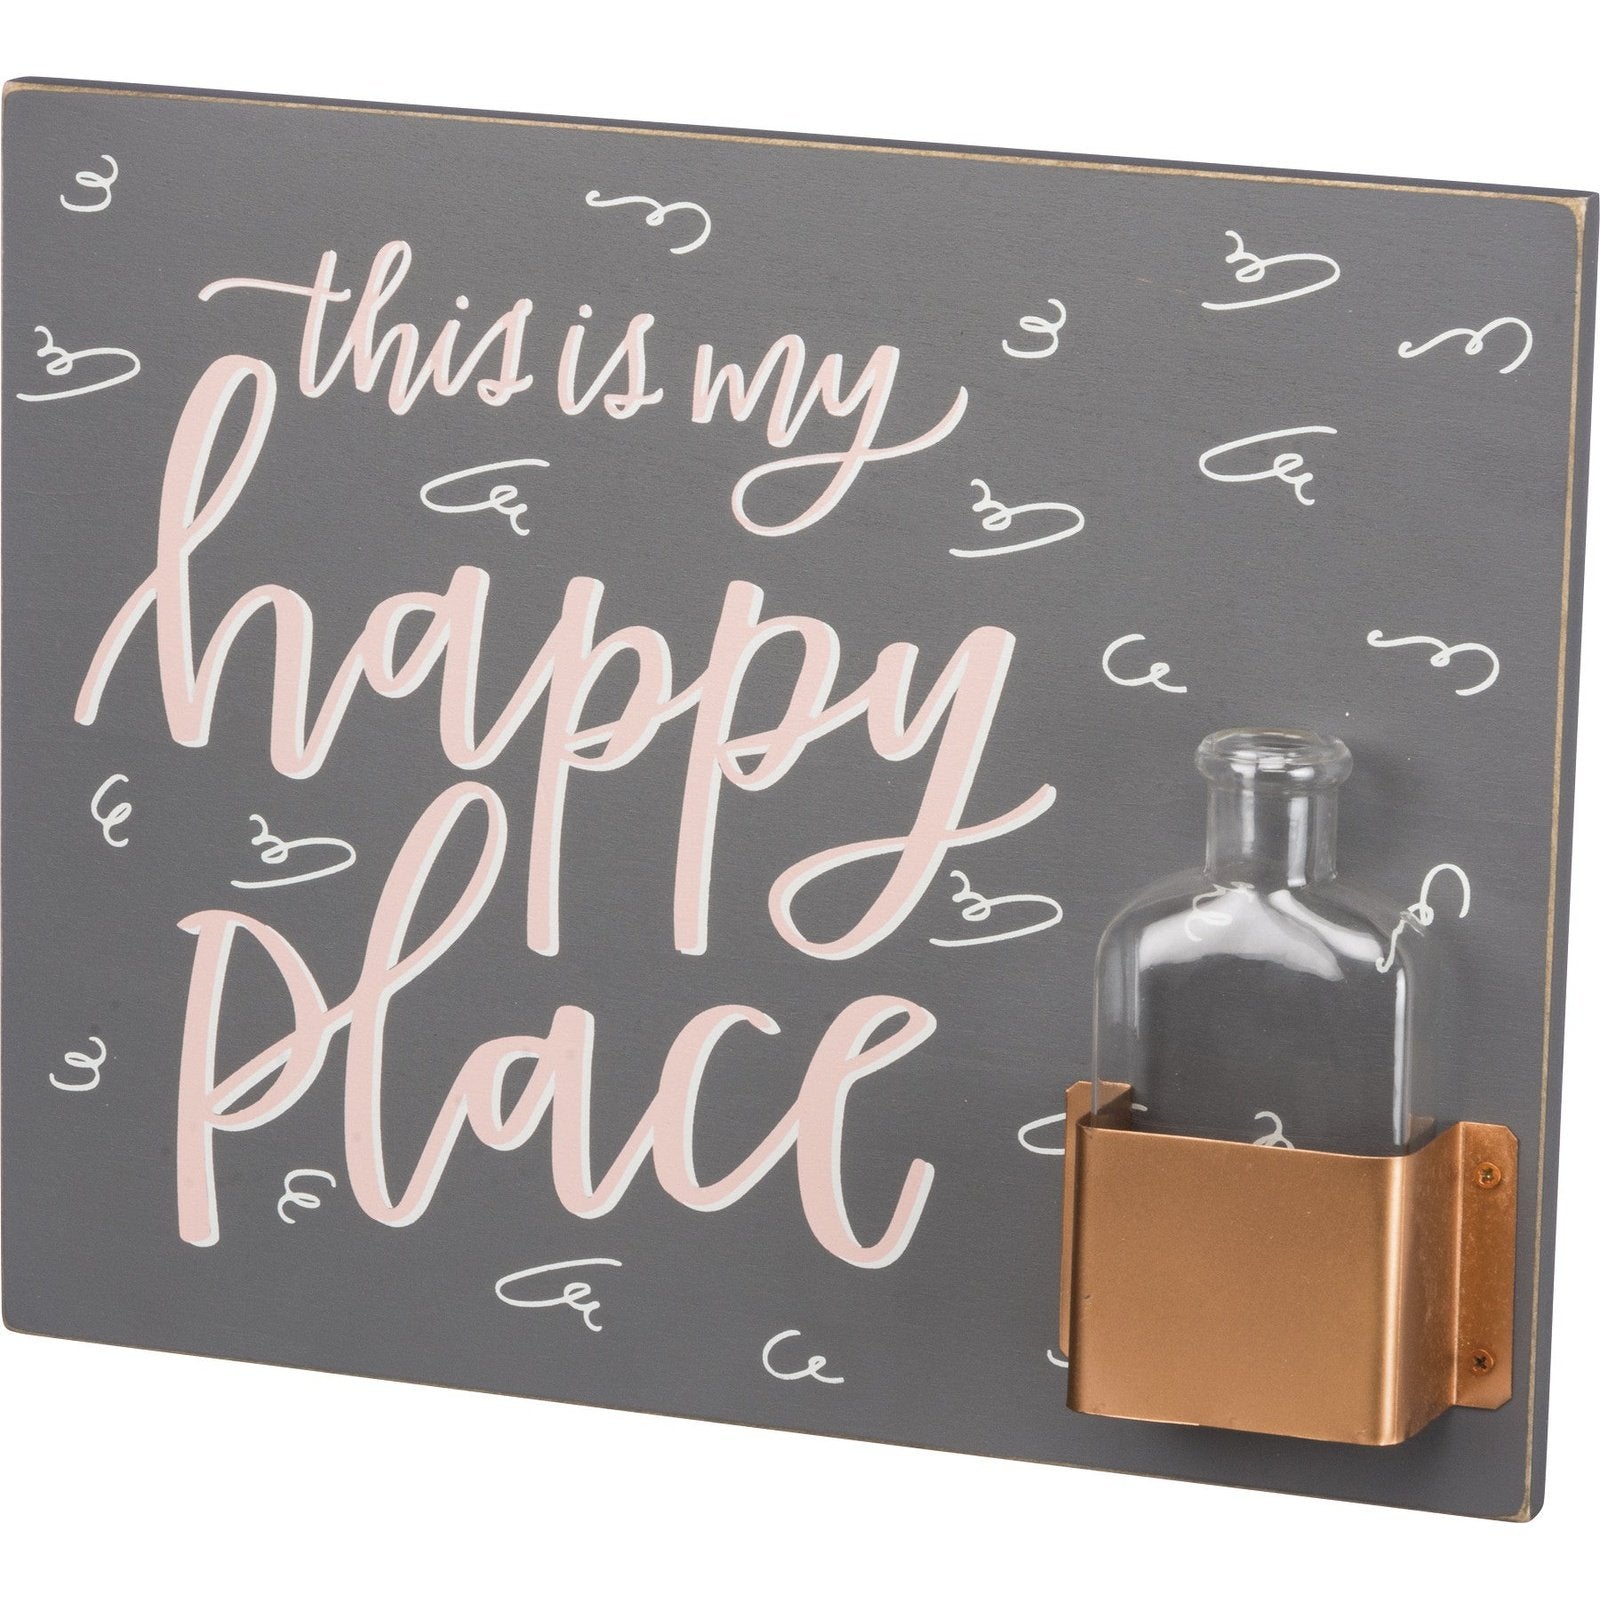 Happy Place Wall Sign Flower Vase SolagoHome